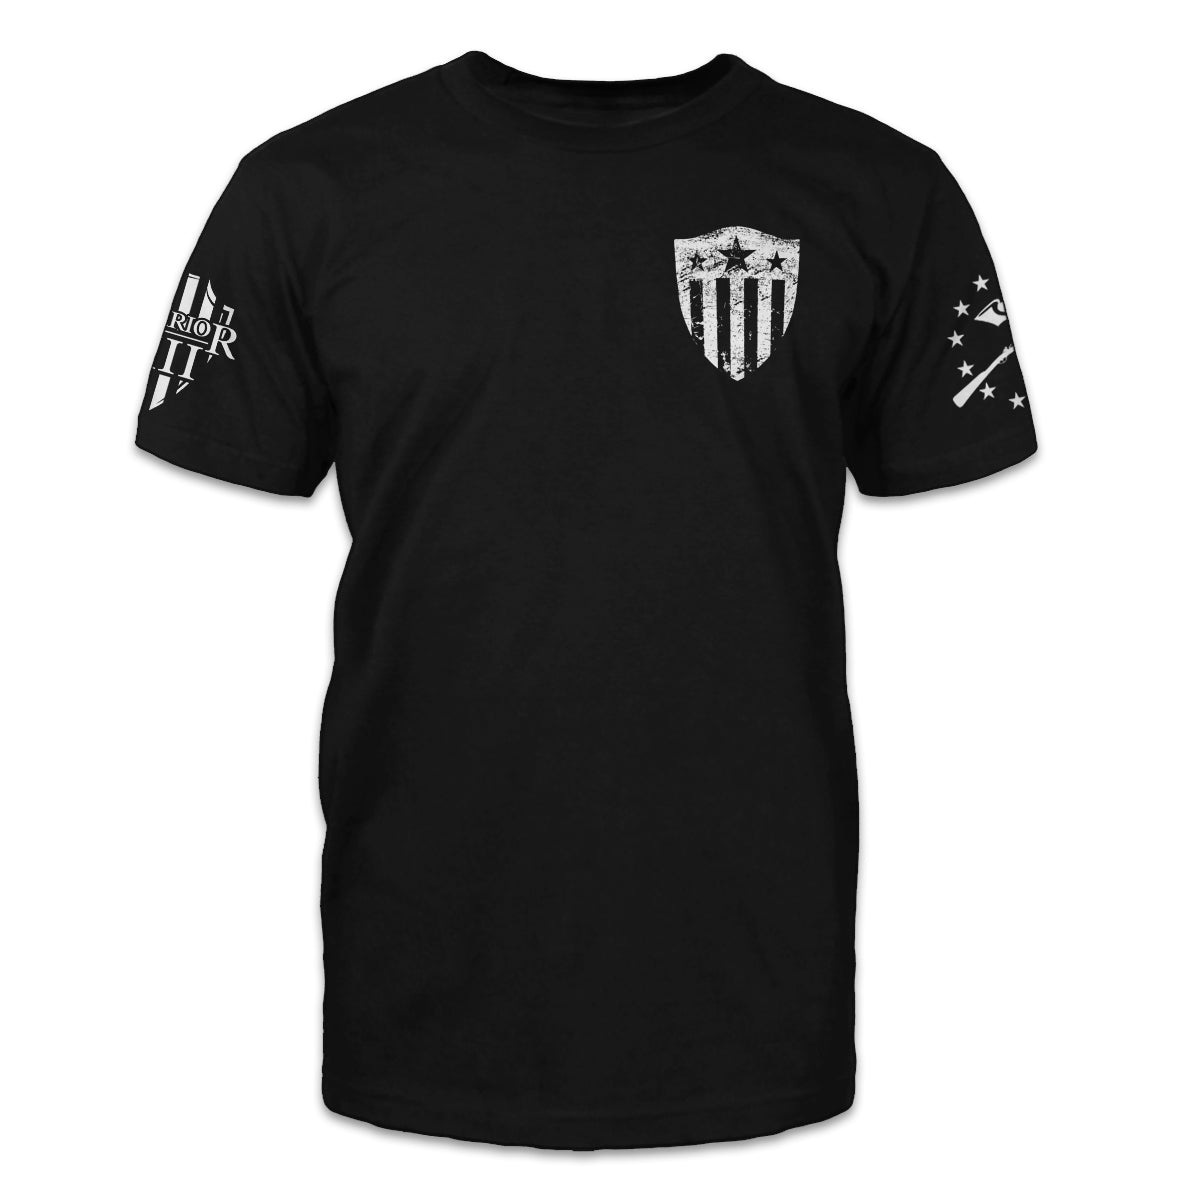 A black American Patriots t-shirt with a crest.